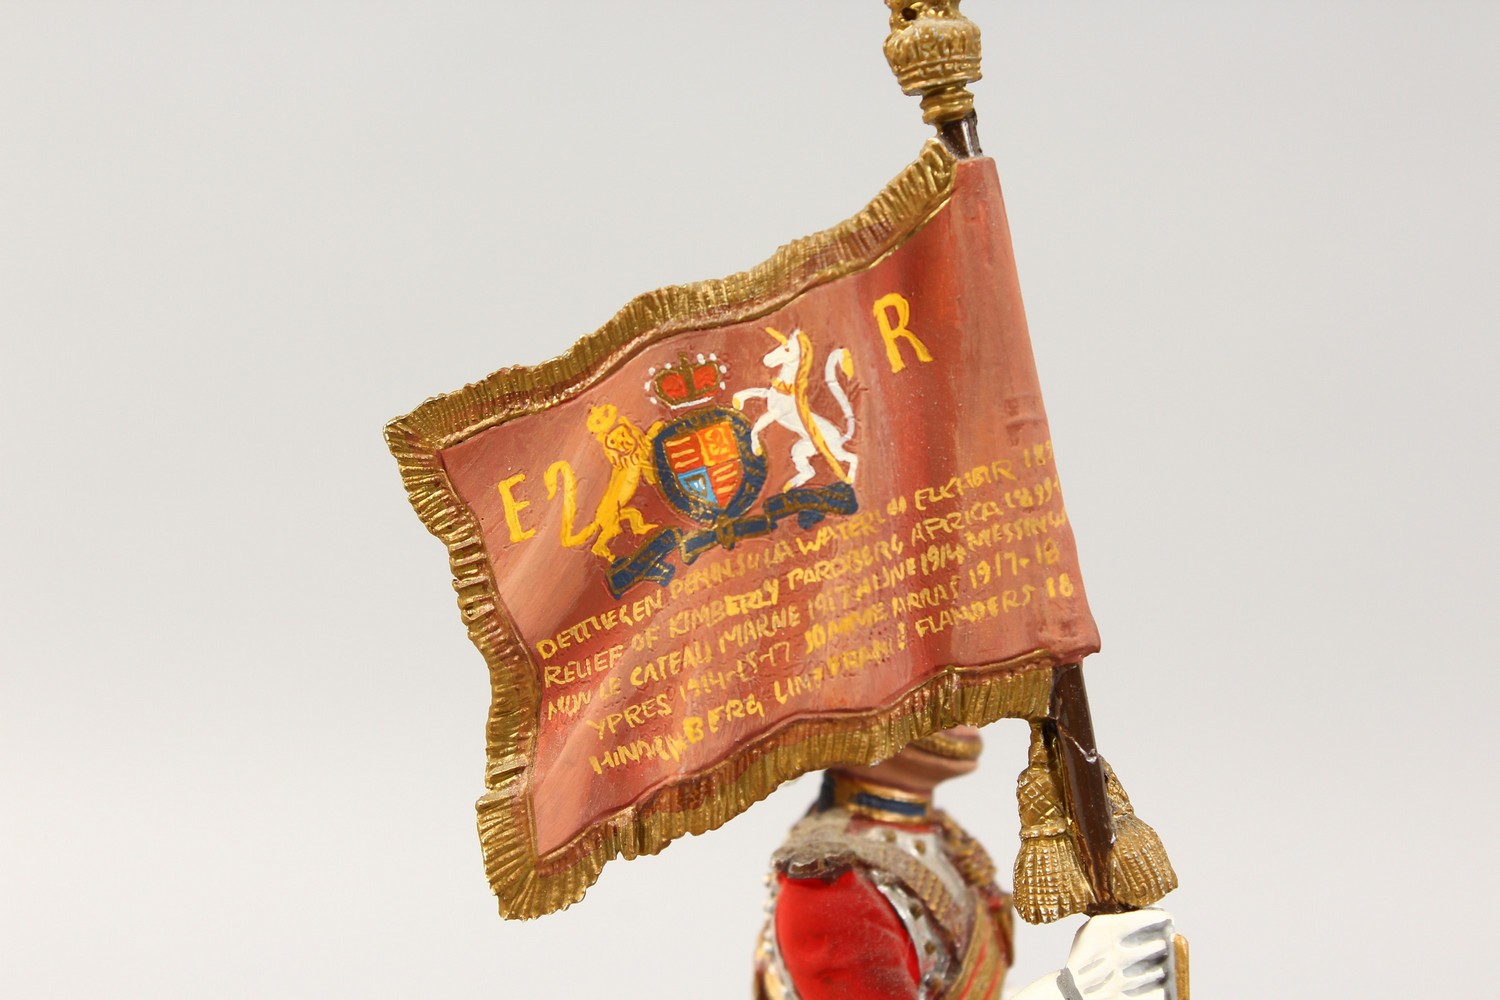 SQUADRON CORPORAL MAJOR OF THE LIFE GUARDS, with sovereigns standard, 6.5ins high, on a wooden - Image 5 of 5